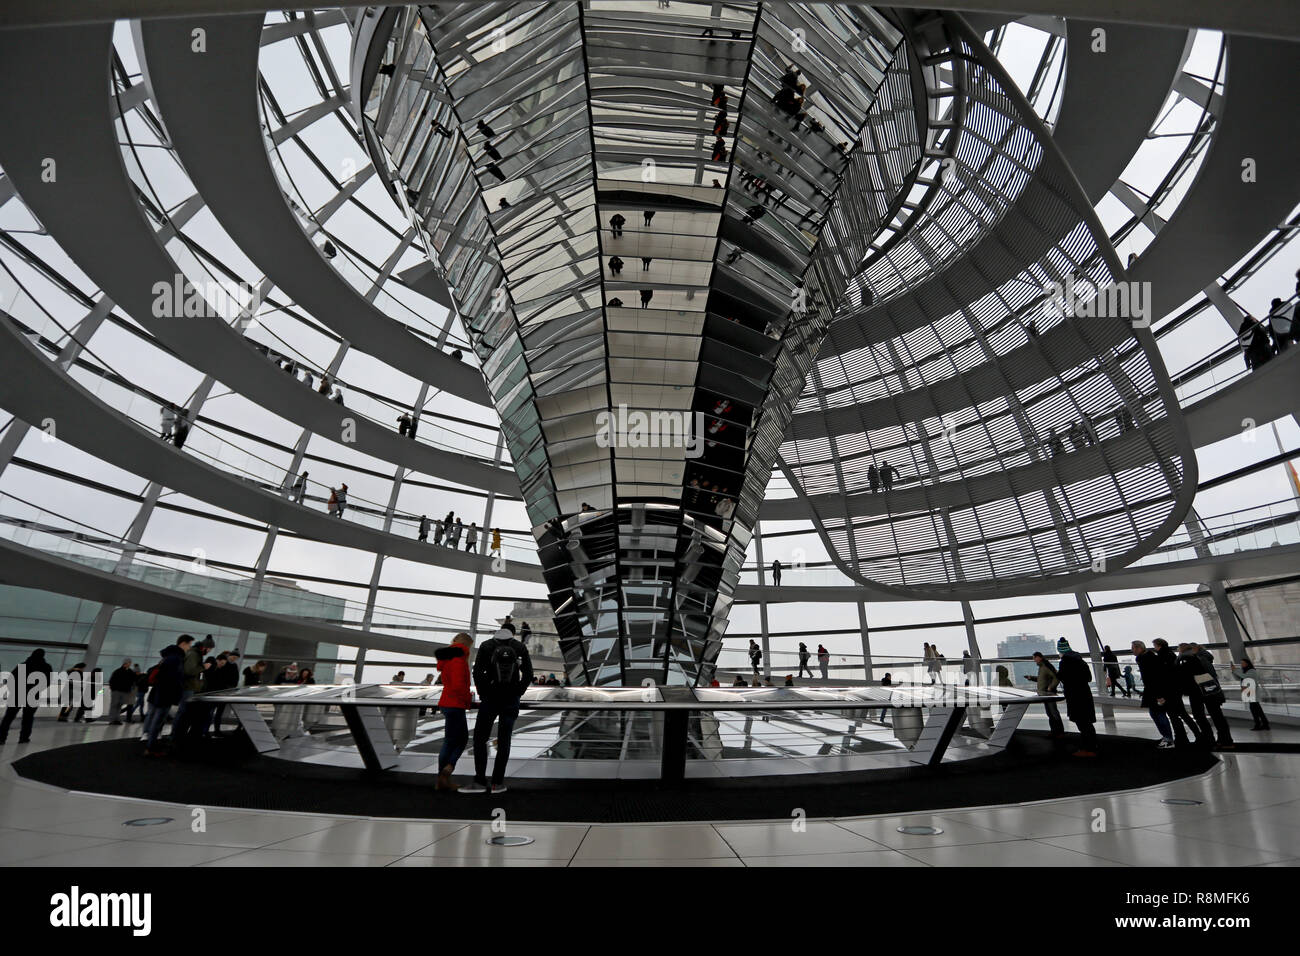 Berlin / Germany - December 15 2018: Visitors walk around the glass dome on top of the Reichstag Building, the German parliament, in central Berlin. Stock Photo